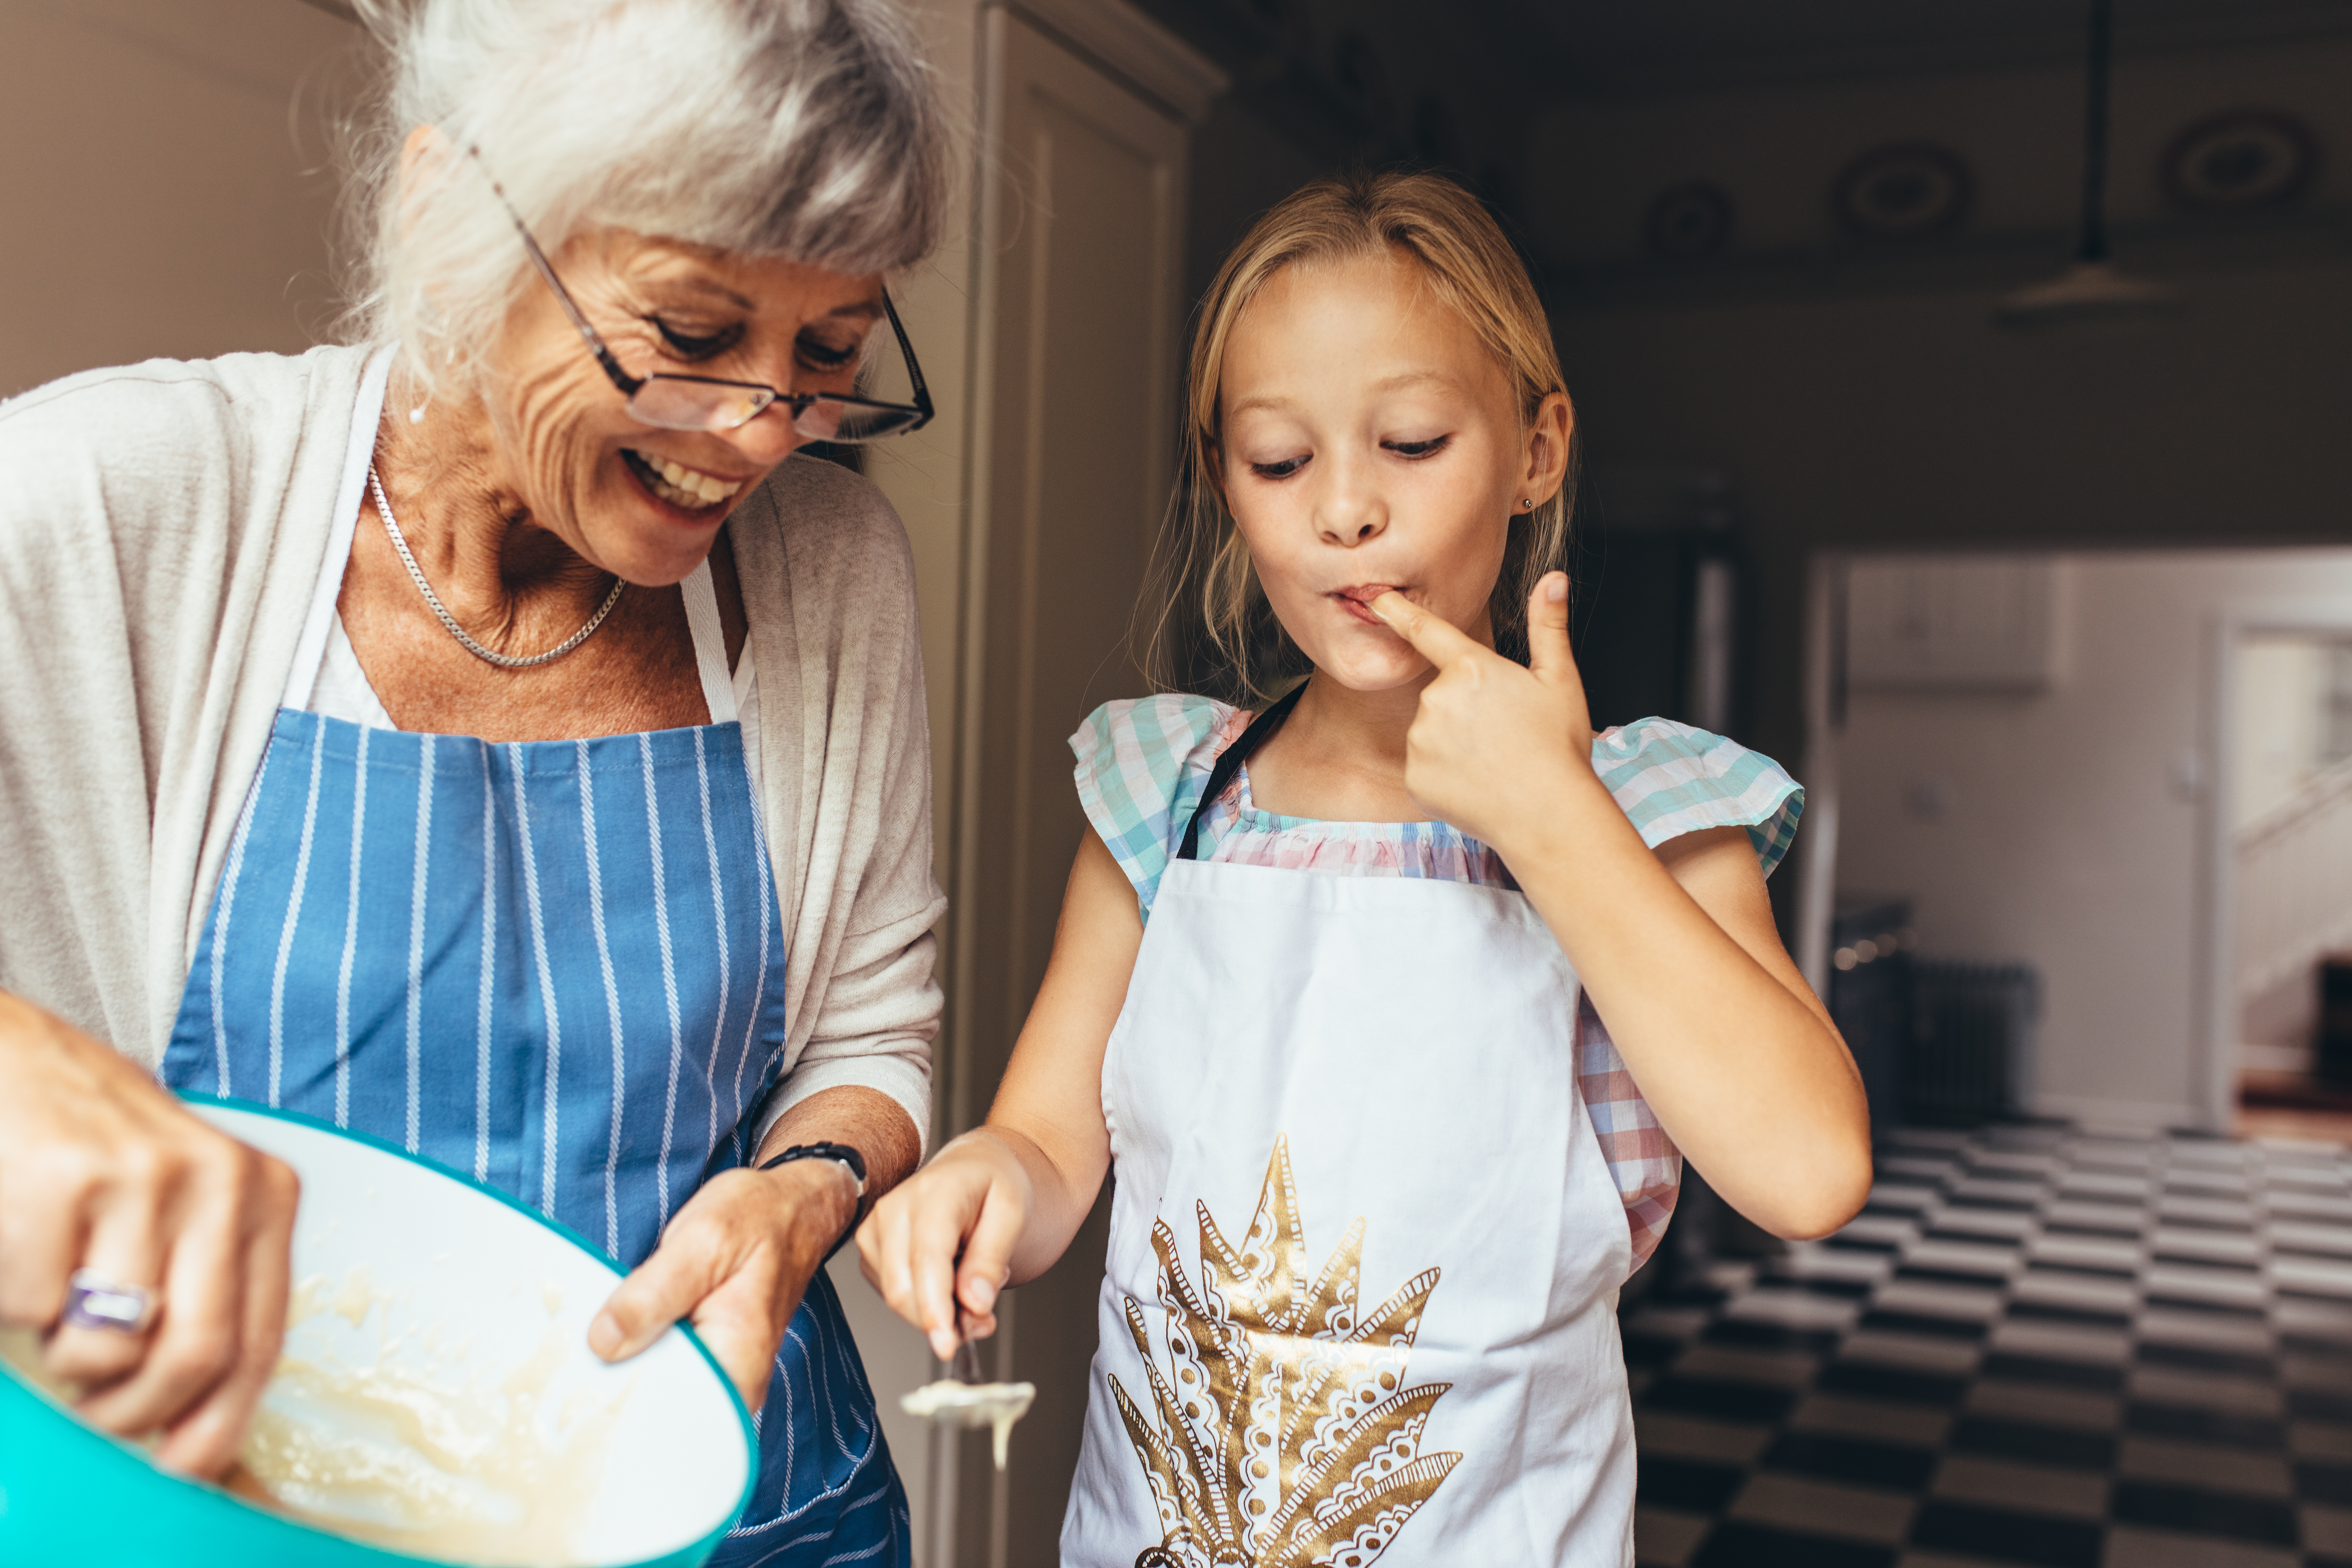 A little girl and her grandmother baking | Source: Shutterstock